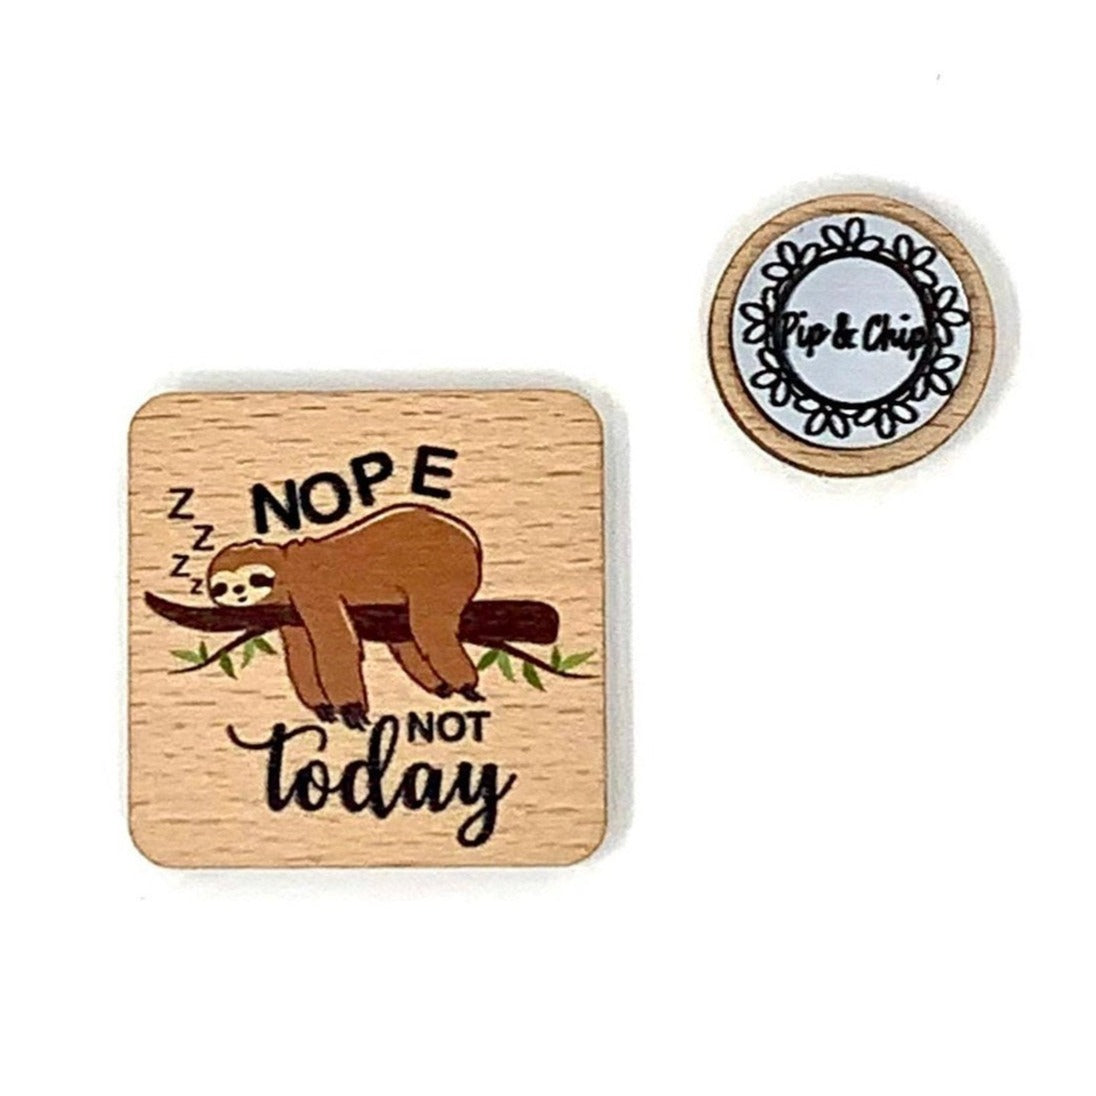 Sloth Nope not Today needle minder magnet cross stitch embroidery needlework